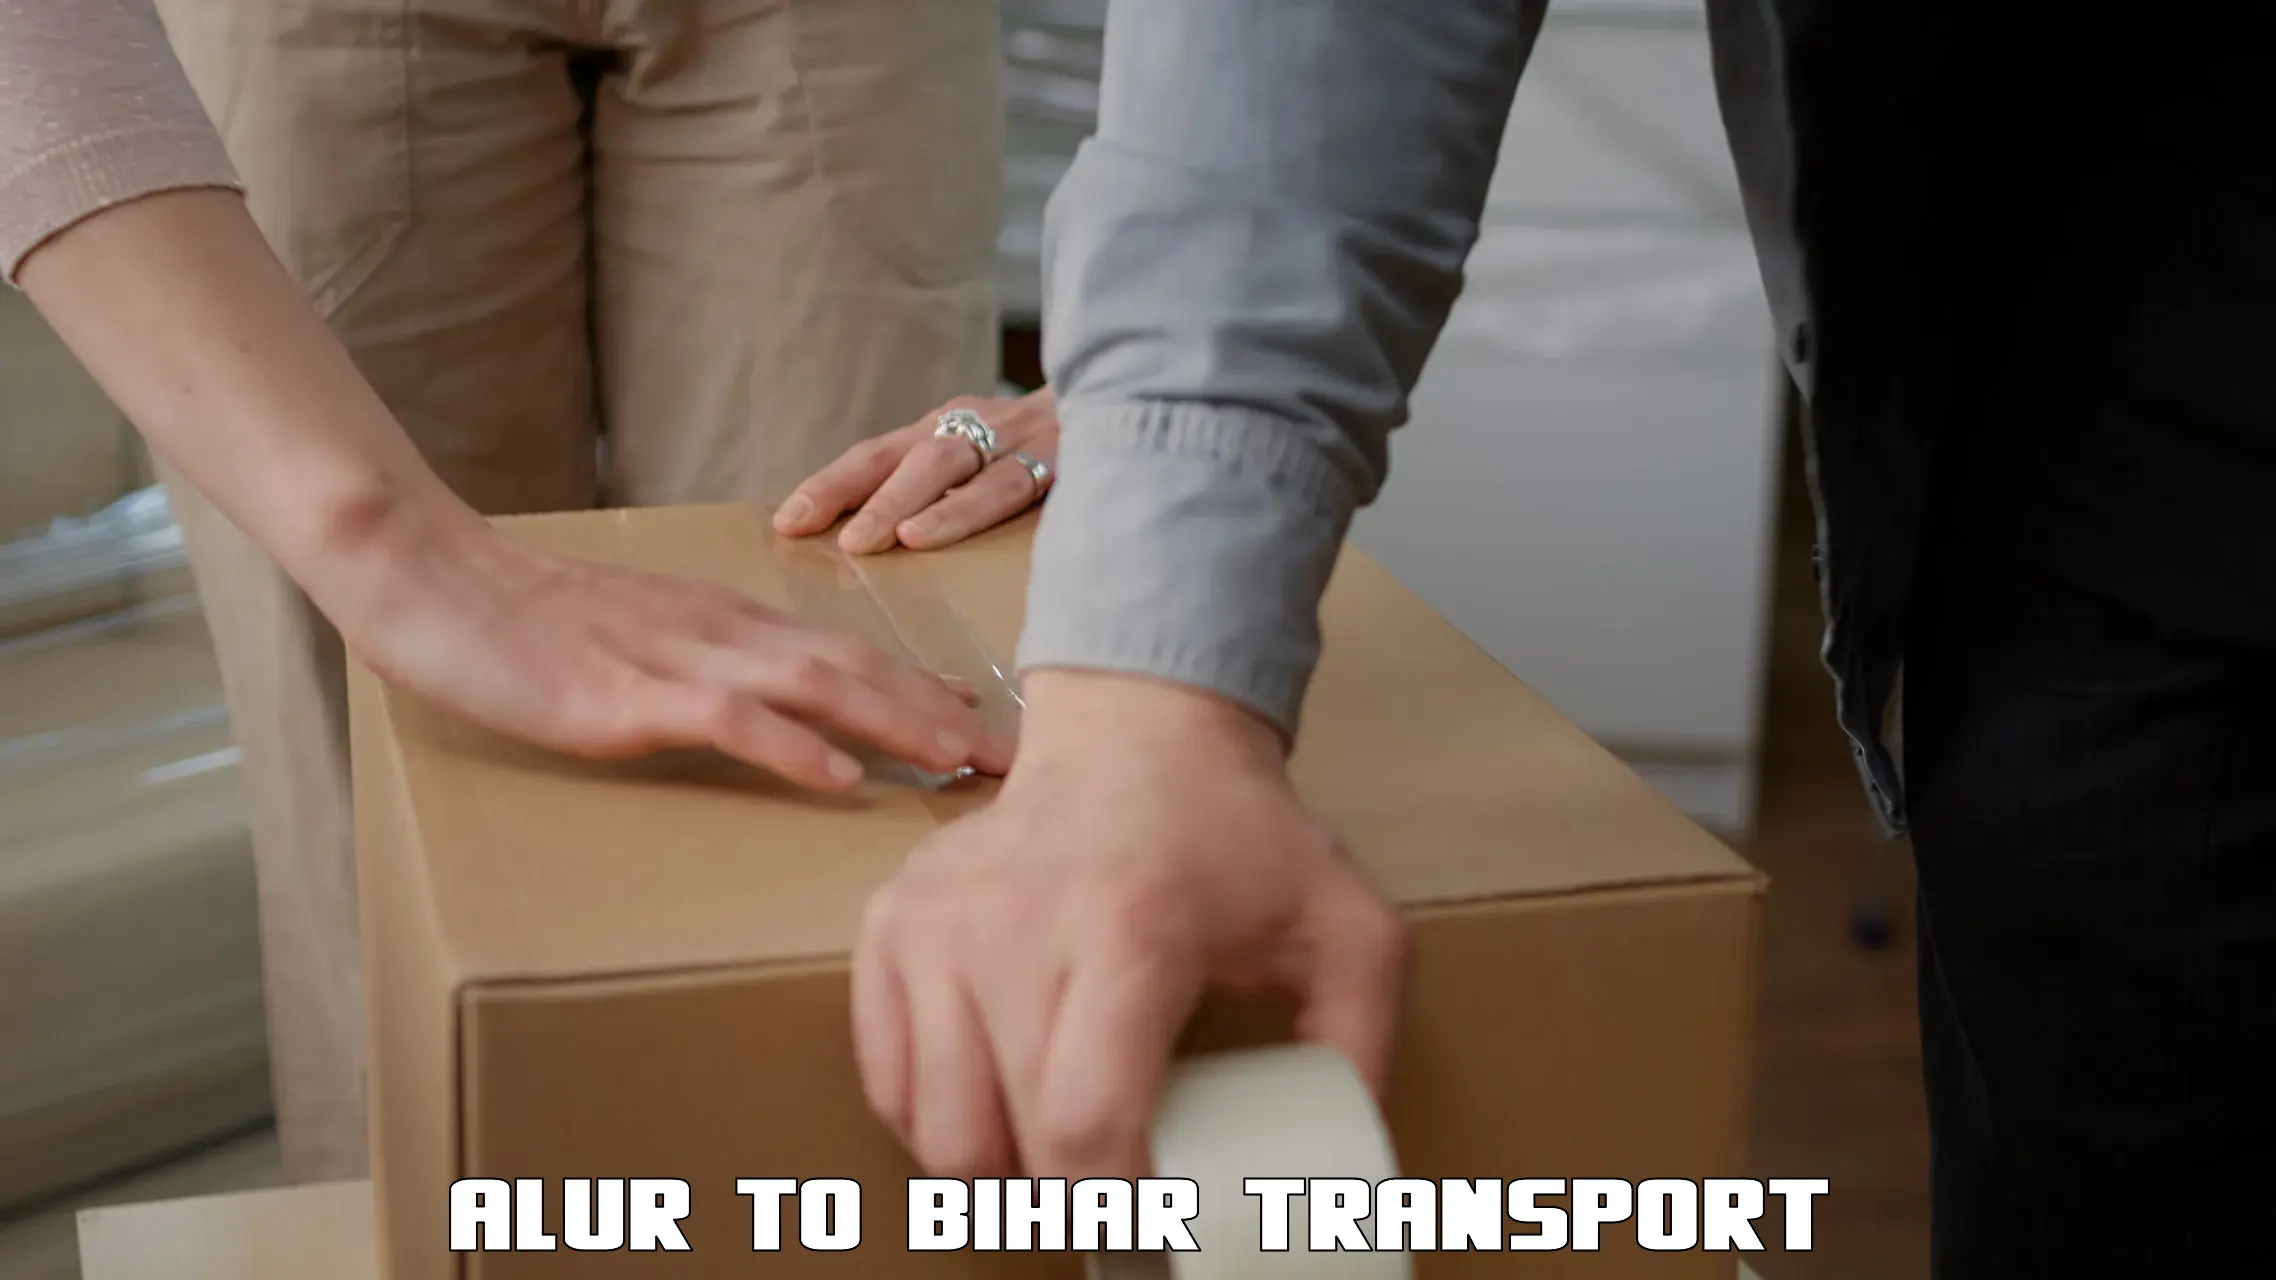 Transport shared services Alur to Bihar